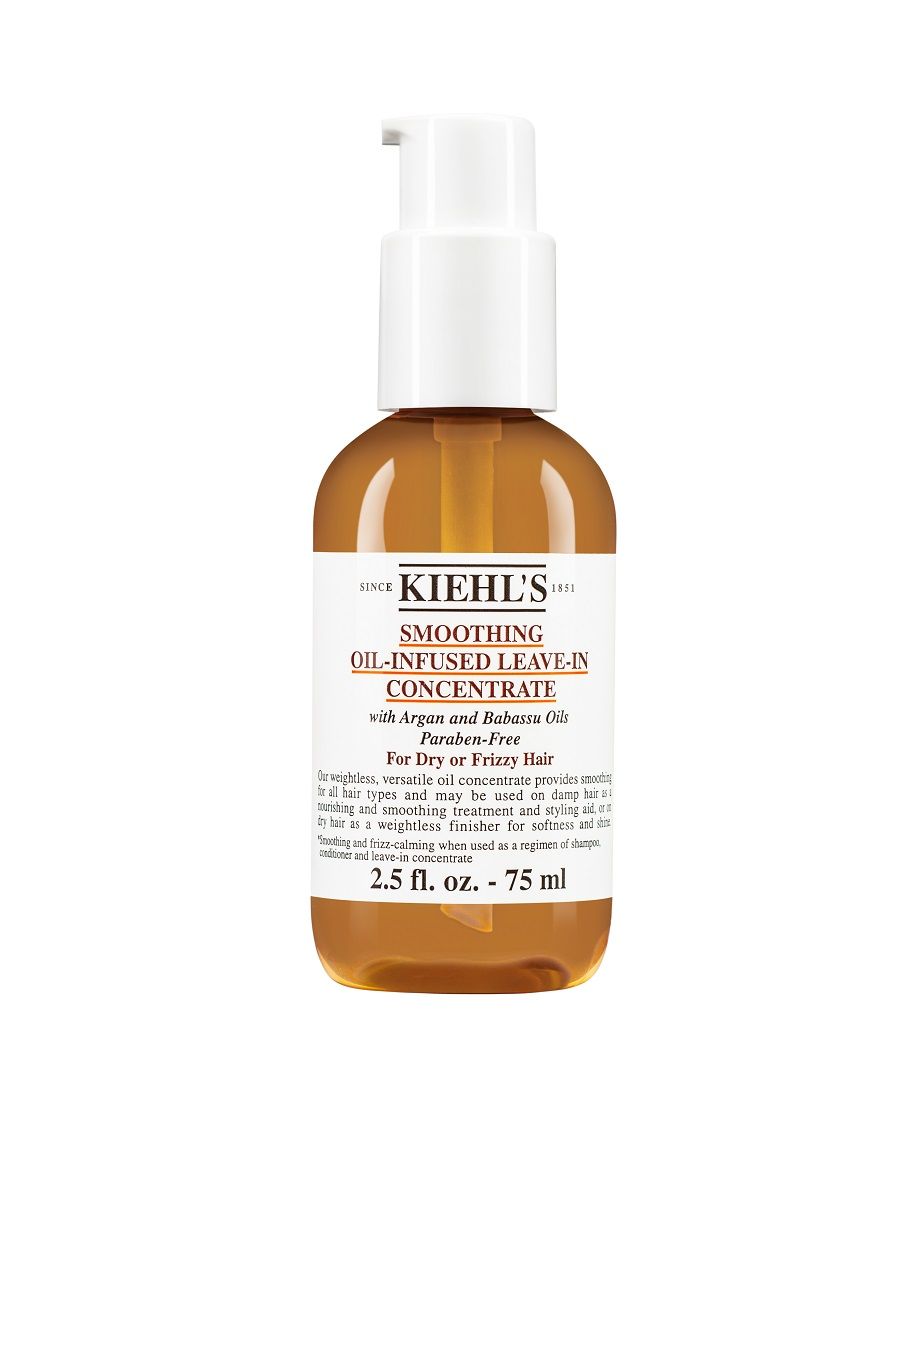 Kiehl's Smoothing Oil-Infused Leave In Concentrate